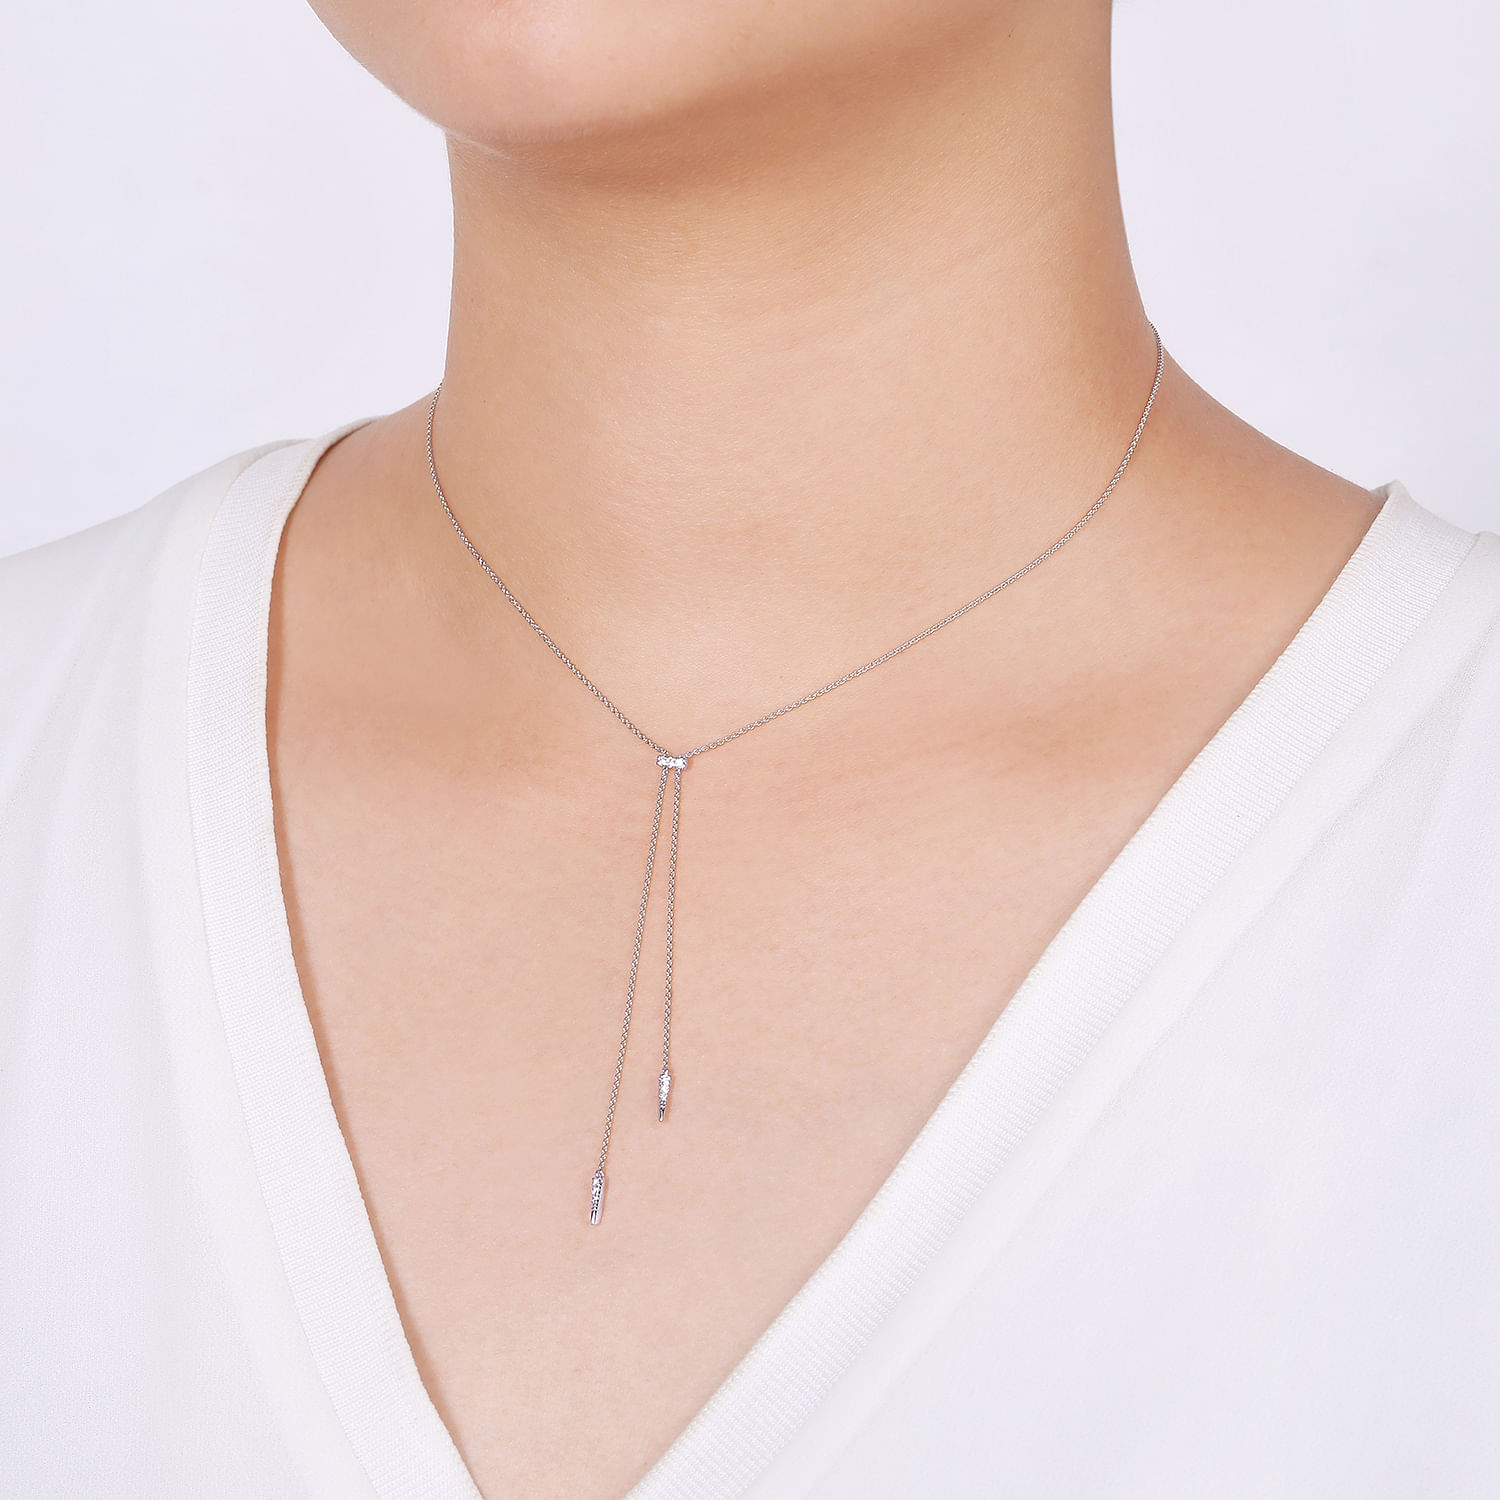 14K White Gold Lariat Choker Necklace with Diamond Bar and Spikes